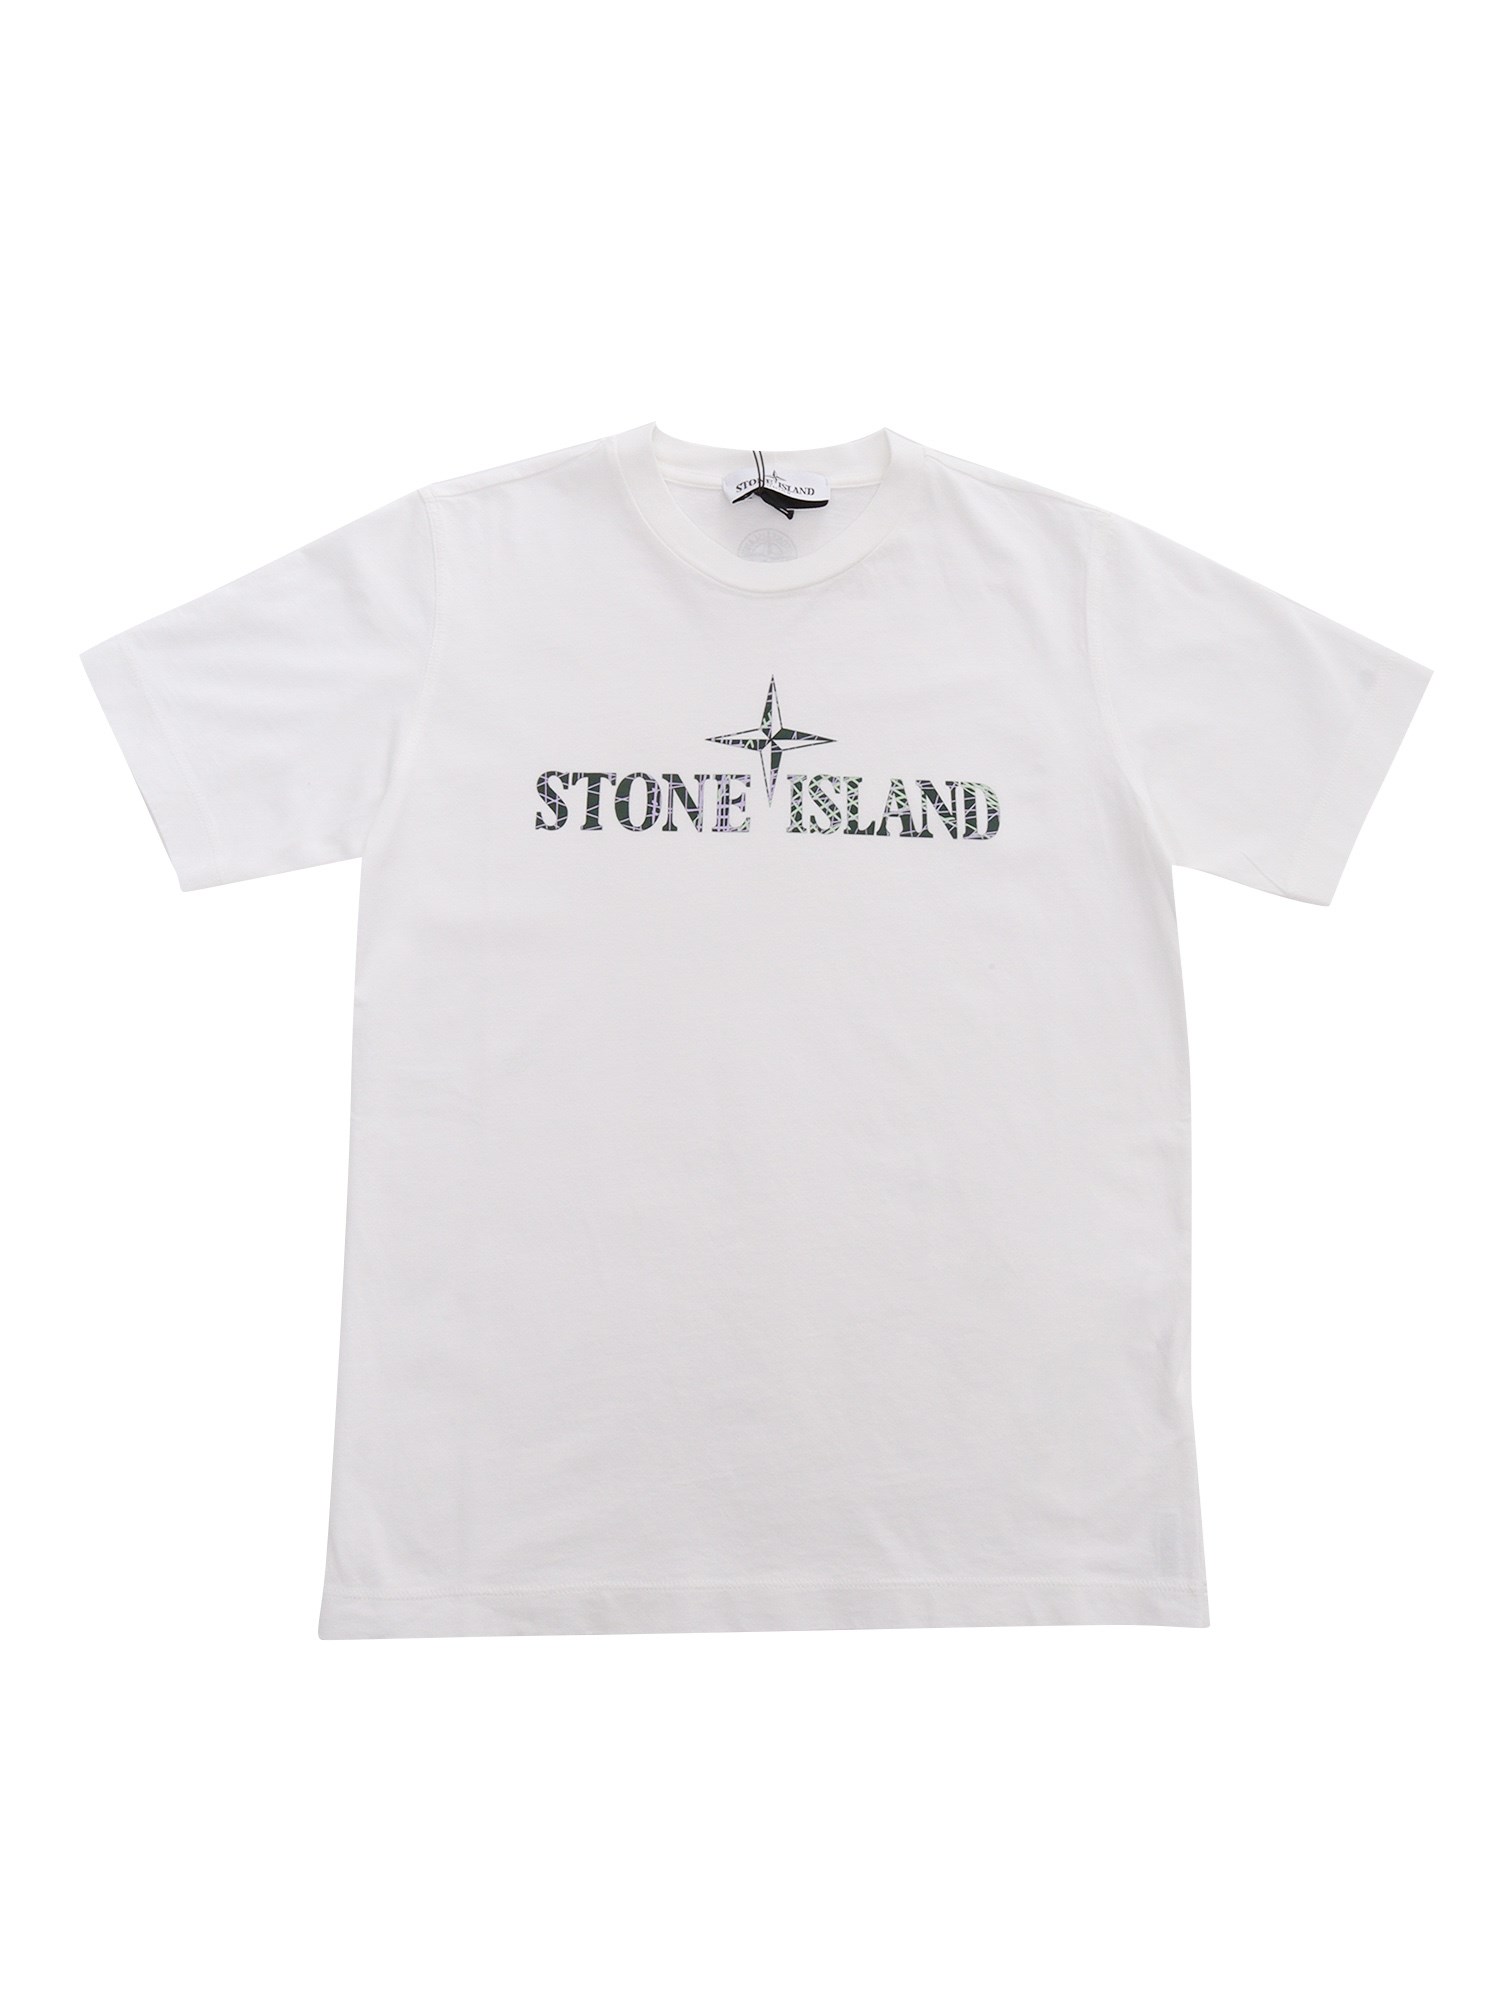 STONE ISLAND CREW NECK T-SHIRT WITH LOGO LETTERING Man White